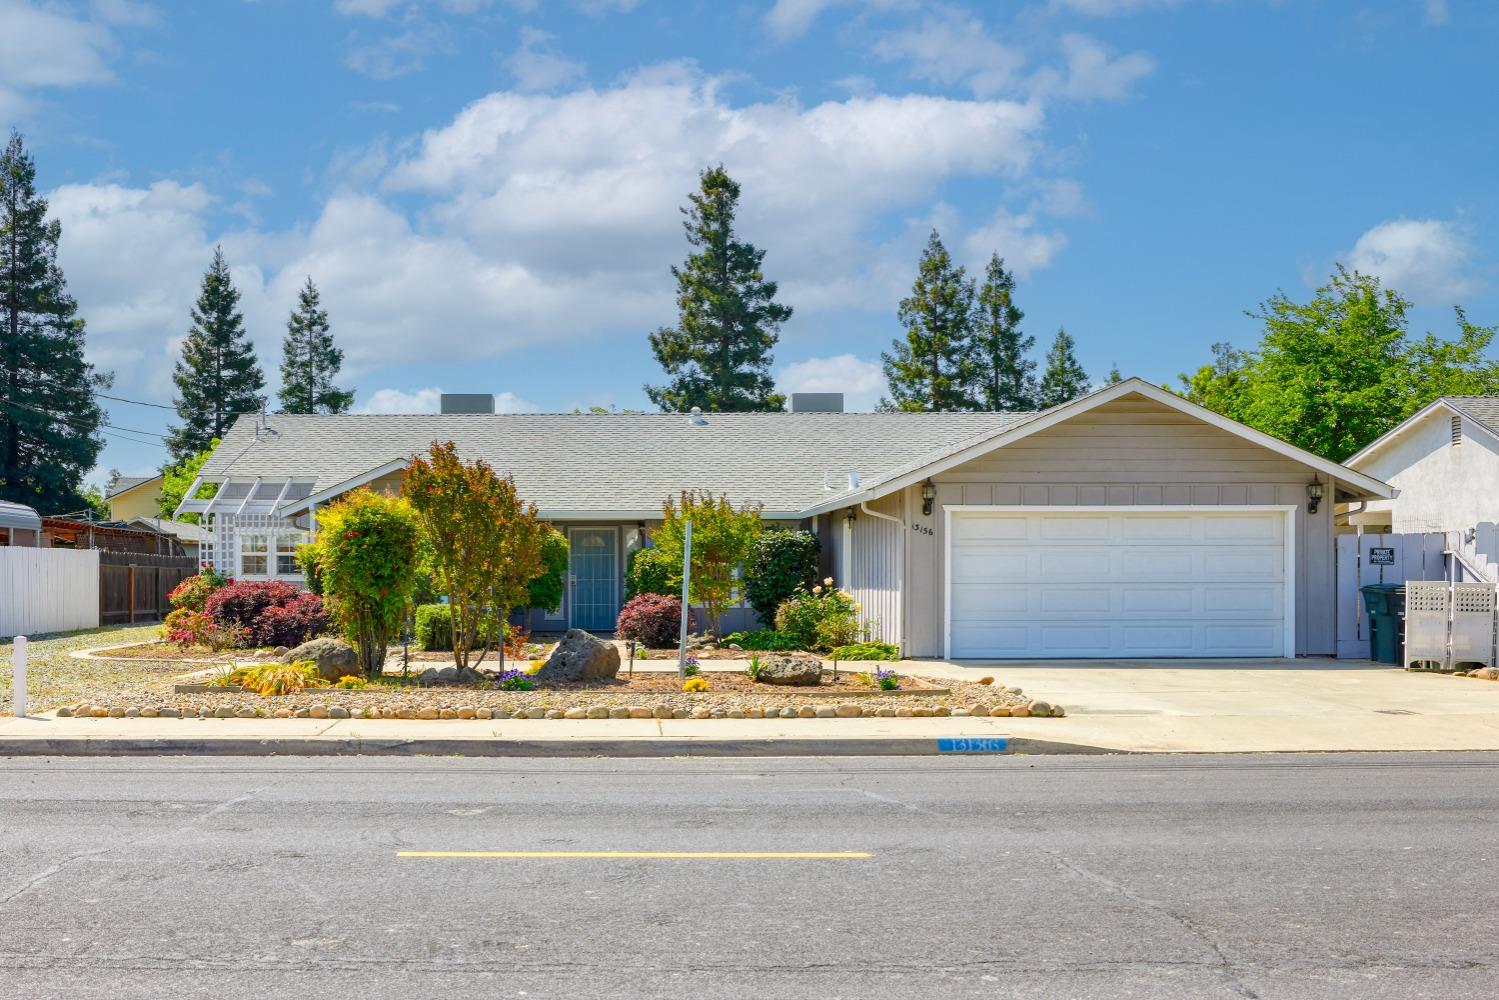 Photo of 13136 Bentley St in Waterford, CA